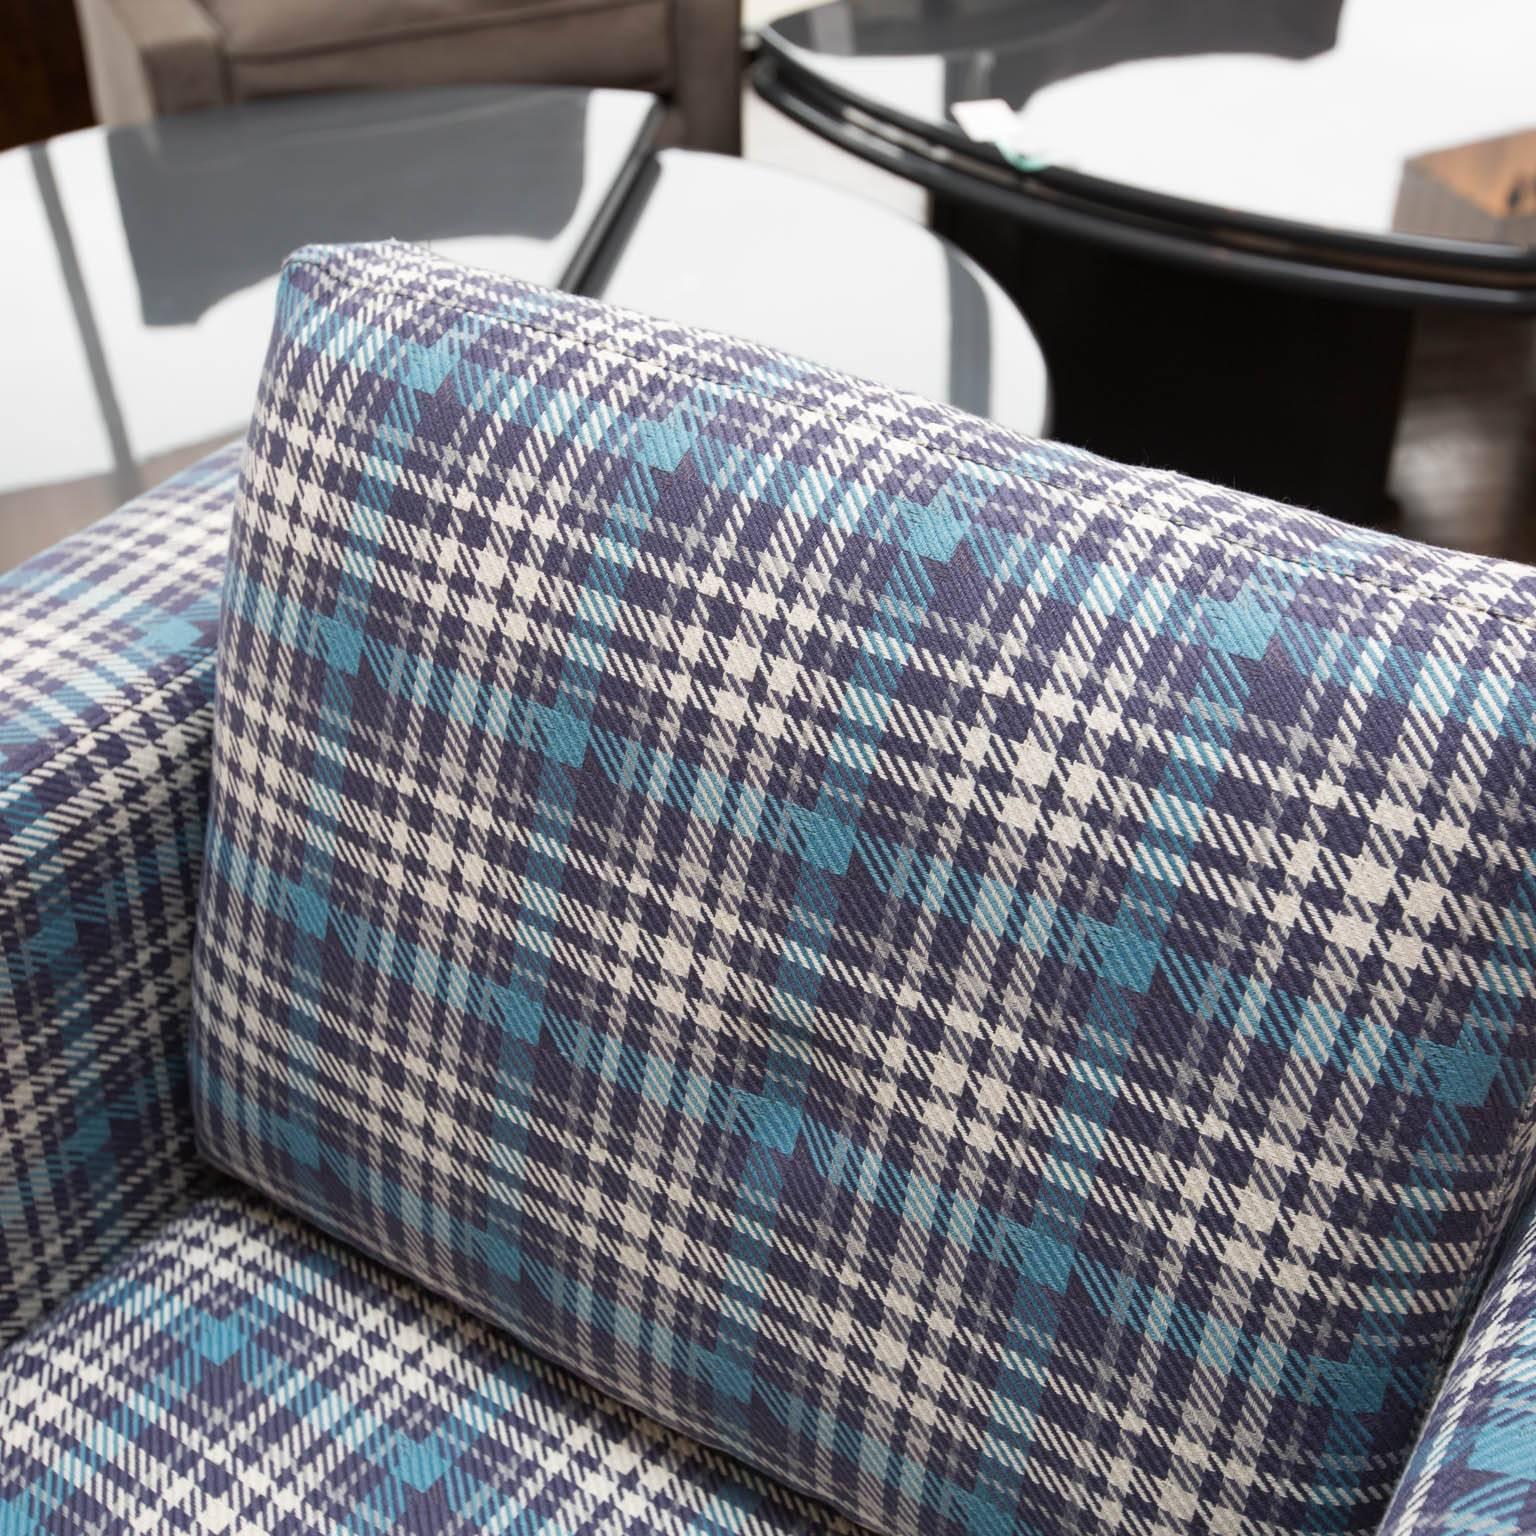 Heavy chairs with smooth swivel action, newly reupholstered in a cool, tartan plaid fabric.